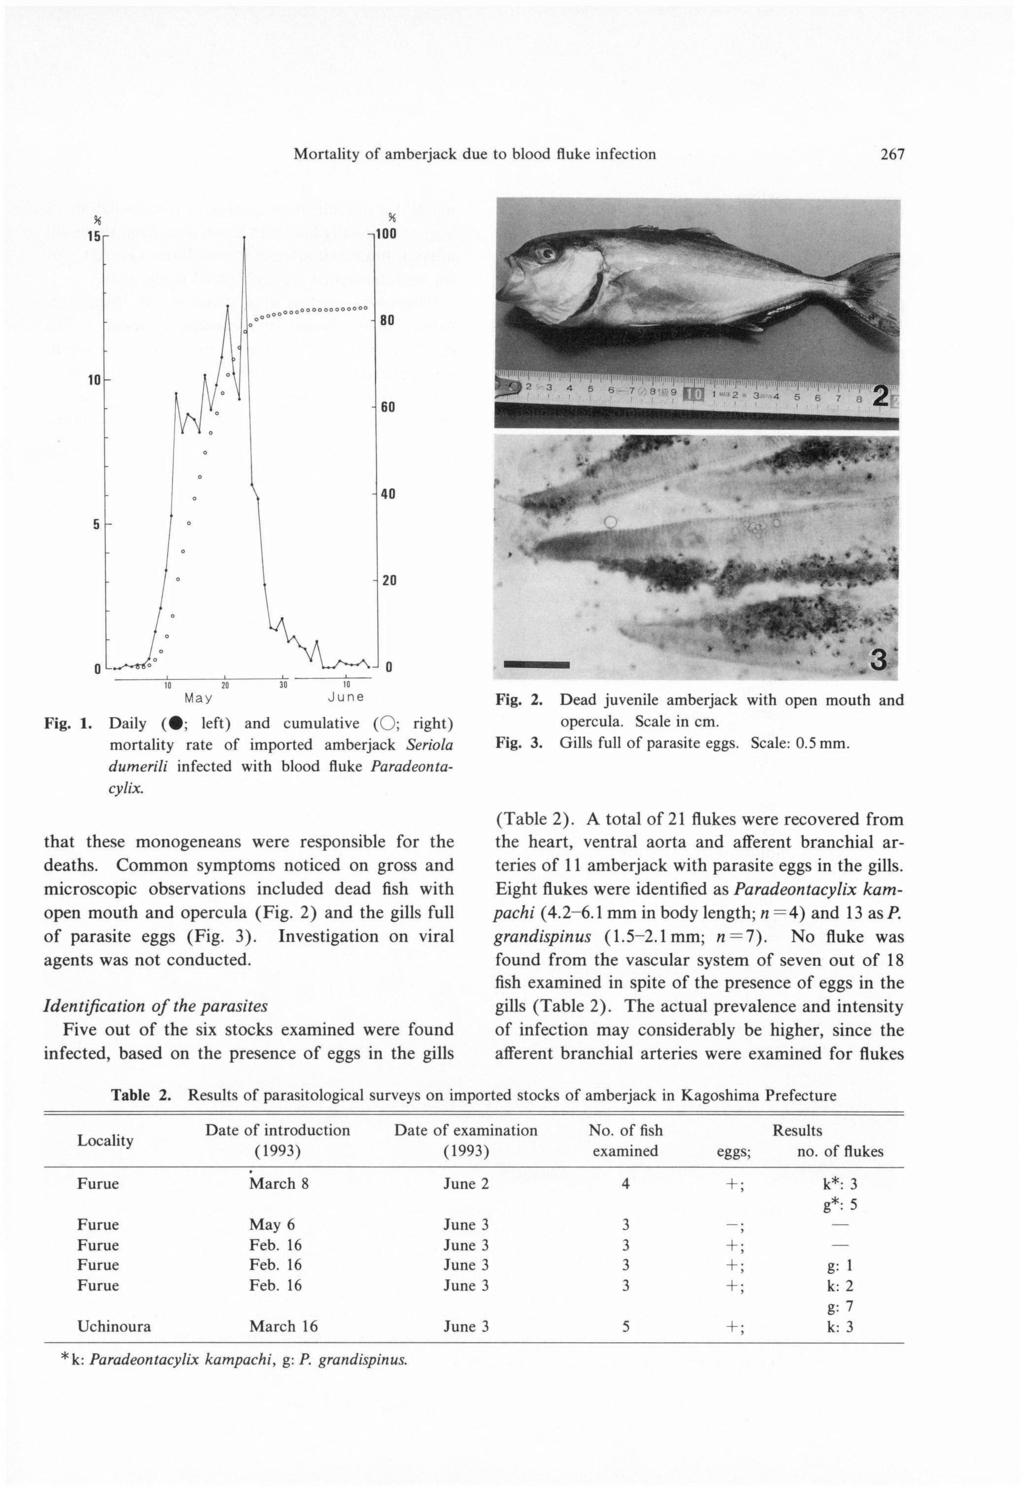 Mortality Fig. 1. Daily ( œ; left) mortality rate dumerili infected and of cumulative imported with of amberjack blood ( ; amberjack fluke due to blood fluke infection Fig. 2.